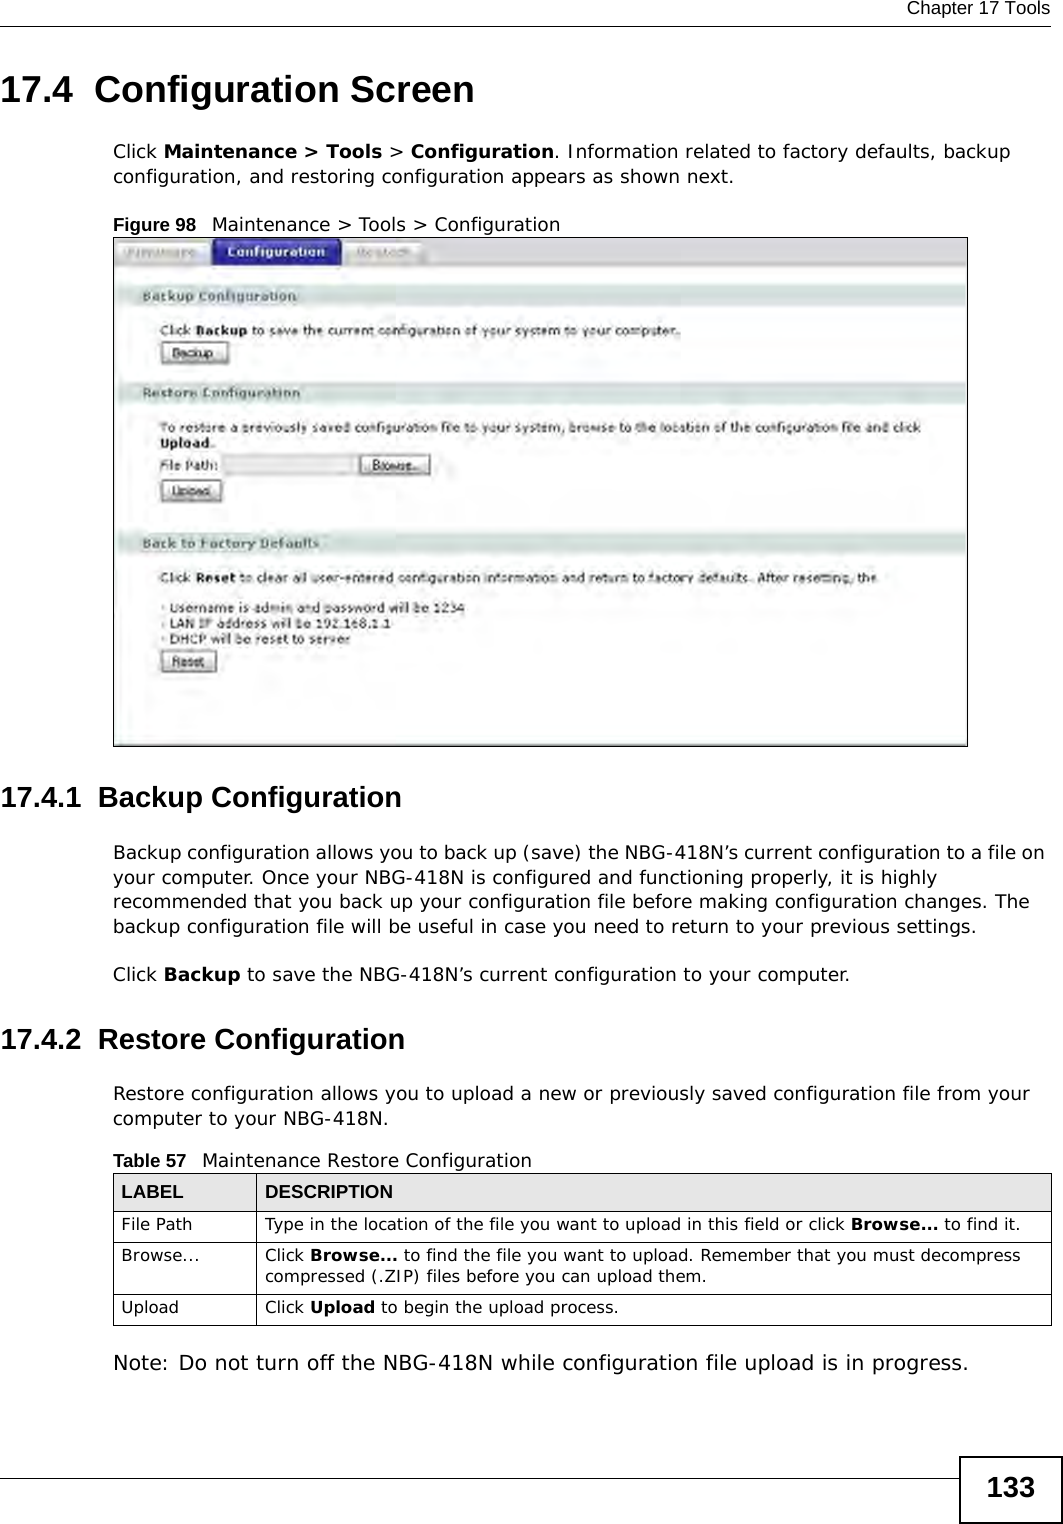  Chapter 17 Tools13317.4  Configuration ScreenClick Maintenance &gt; Tools &gt; Configuration. Information related to factory defaults, backup configuration, and restoring configuration appears as shown next.Figure 98   Maintenance &gt; Tools &gt; Configuration 17.4.1  Backup ConfigurationBackup configuration allows you to back up (save) the NBG-418N’s current configuration to a file on your computer. Once your NBG-418N is configured and functioning properly, it is highly recommended that you back up your configuration file before making configuration changes. The backup configuration file will be useful in case you need to return to your previous settings. Click Backup to save the NBG-418N’s current configuration to your computer.17.4.2  Restore ConfigurationRestore configuration allows you to upload a new or previously saved configuration file from your computer to your NBG-418N.Note: Do not turn off the NBG-418N while configuration file upload is in progress.Table 57   Maintenance Restore ConfigurationLABEL DESCRIPTIONFile Path  Type in the location of the file you want to upload in this field or click Browse... to find it.Browse...  Click Browse... to find the file you want to upload. Remember that you must decompress compressed (.ZIP) files before you can upload them. Upload  Click Upload to begin the upload process.